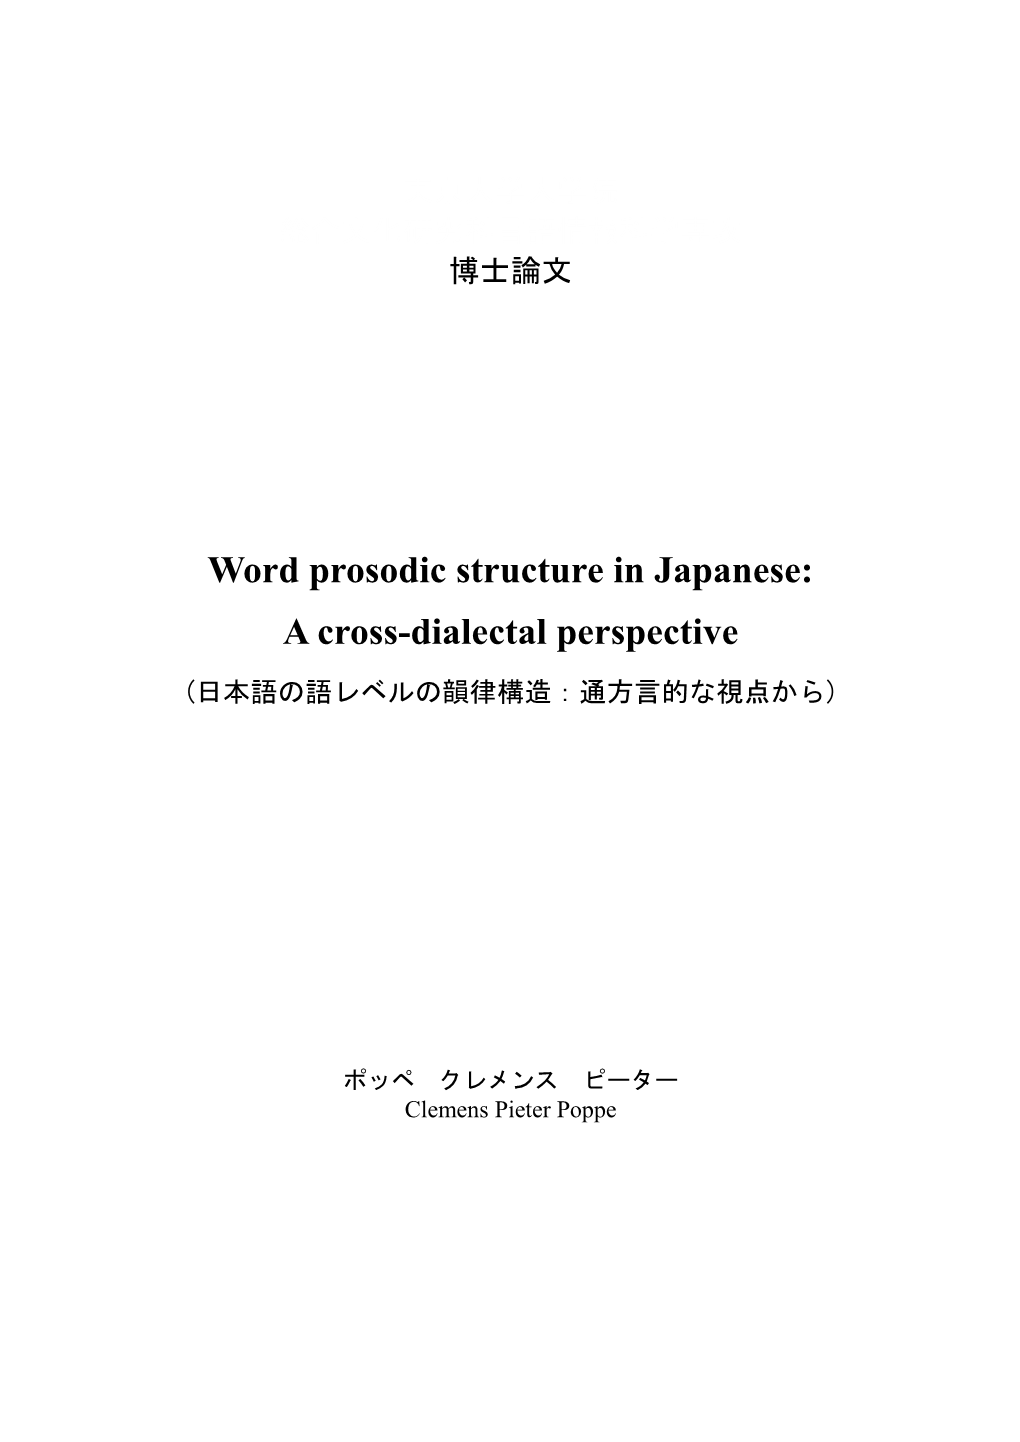 Word Prosodic Structure in Japanese: a Cross-Dialectal Perspective (日本語の語レベルの韻律構造：通方言的な視点から)